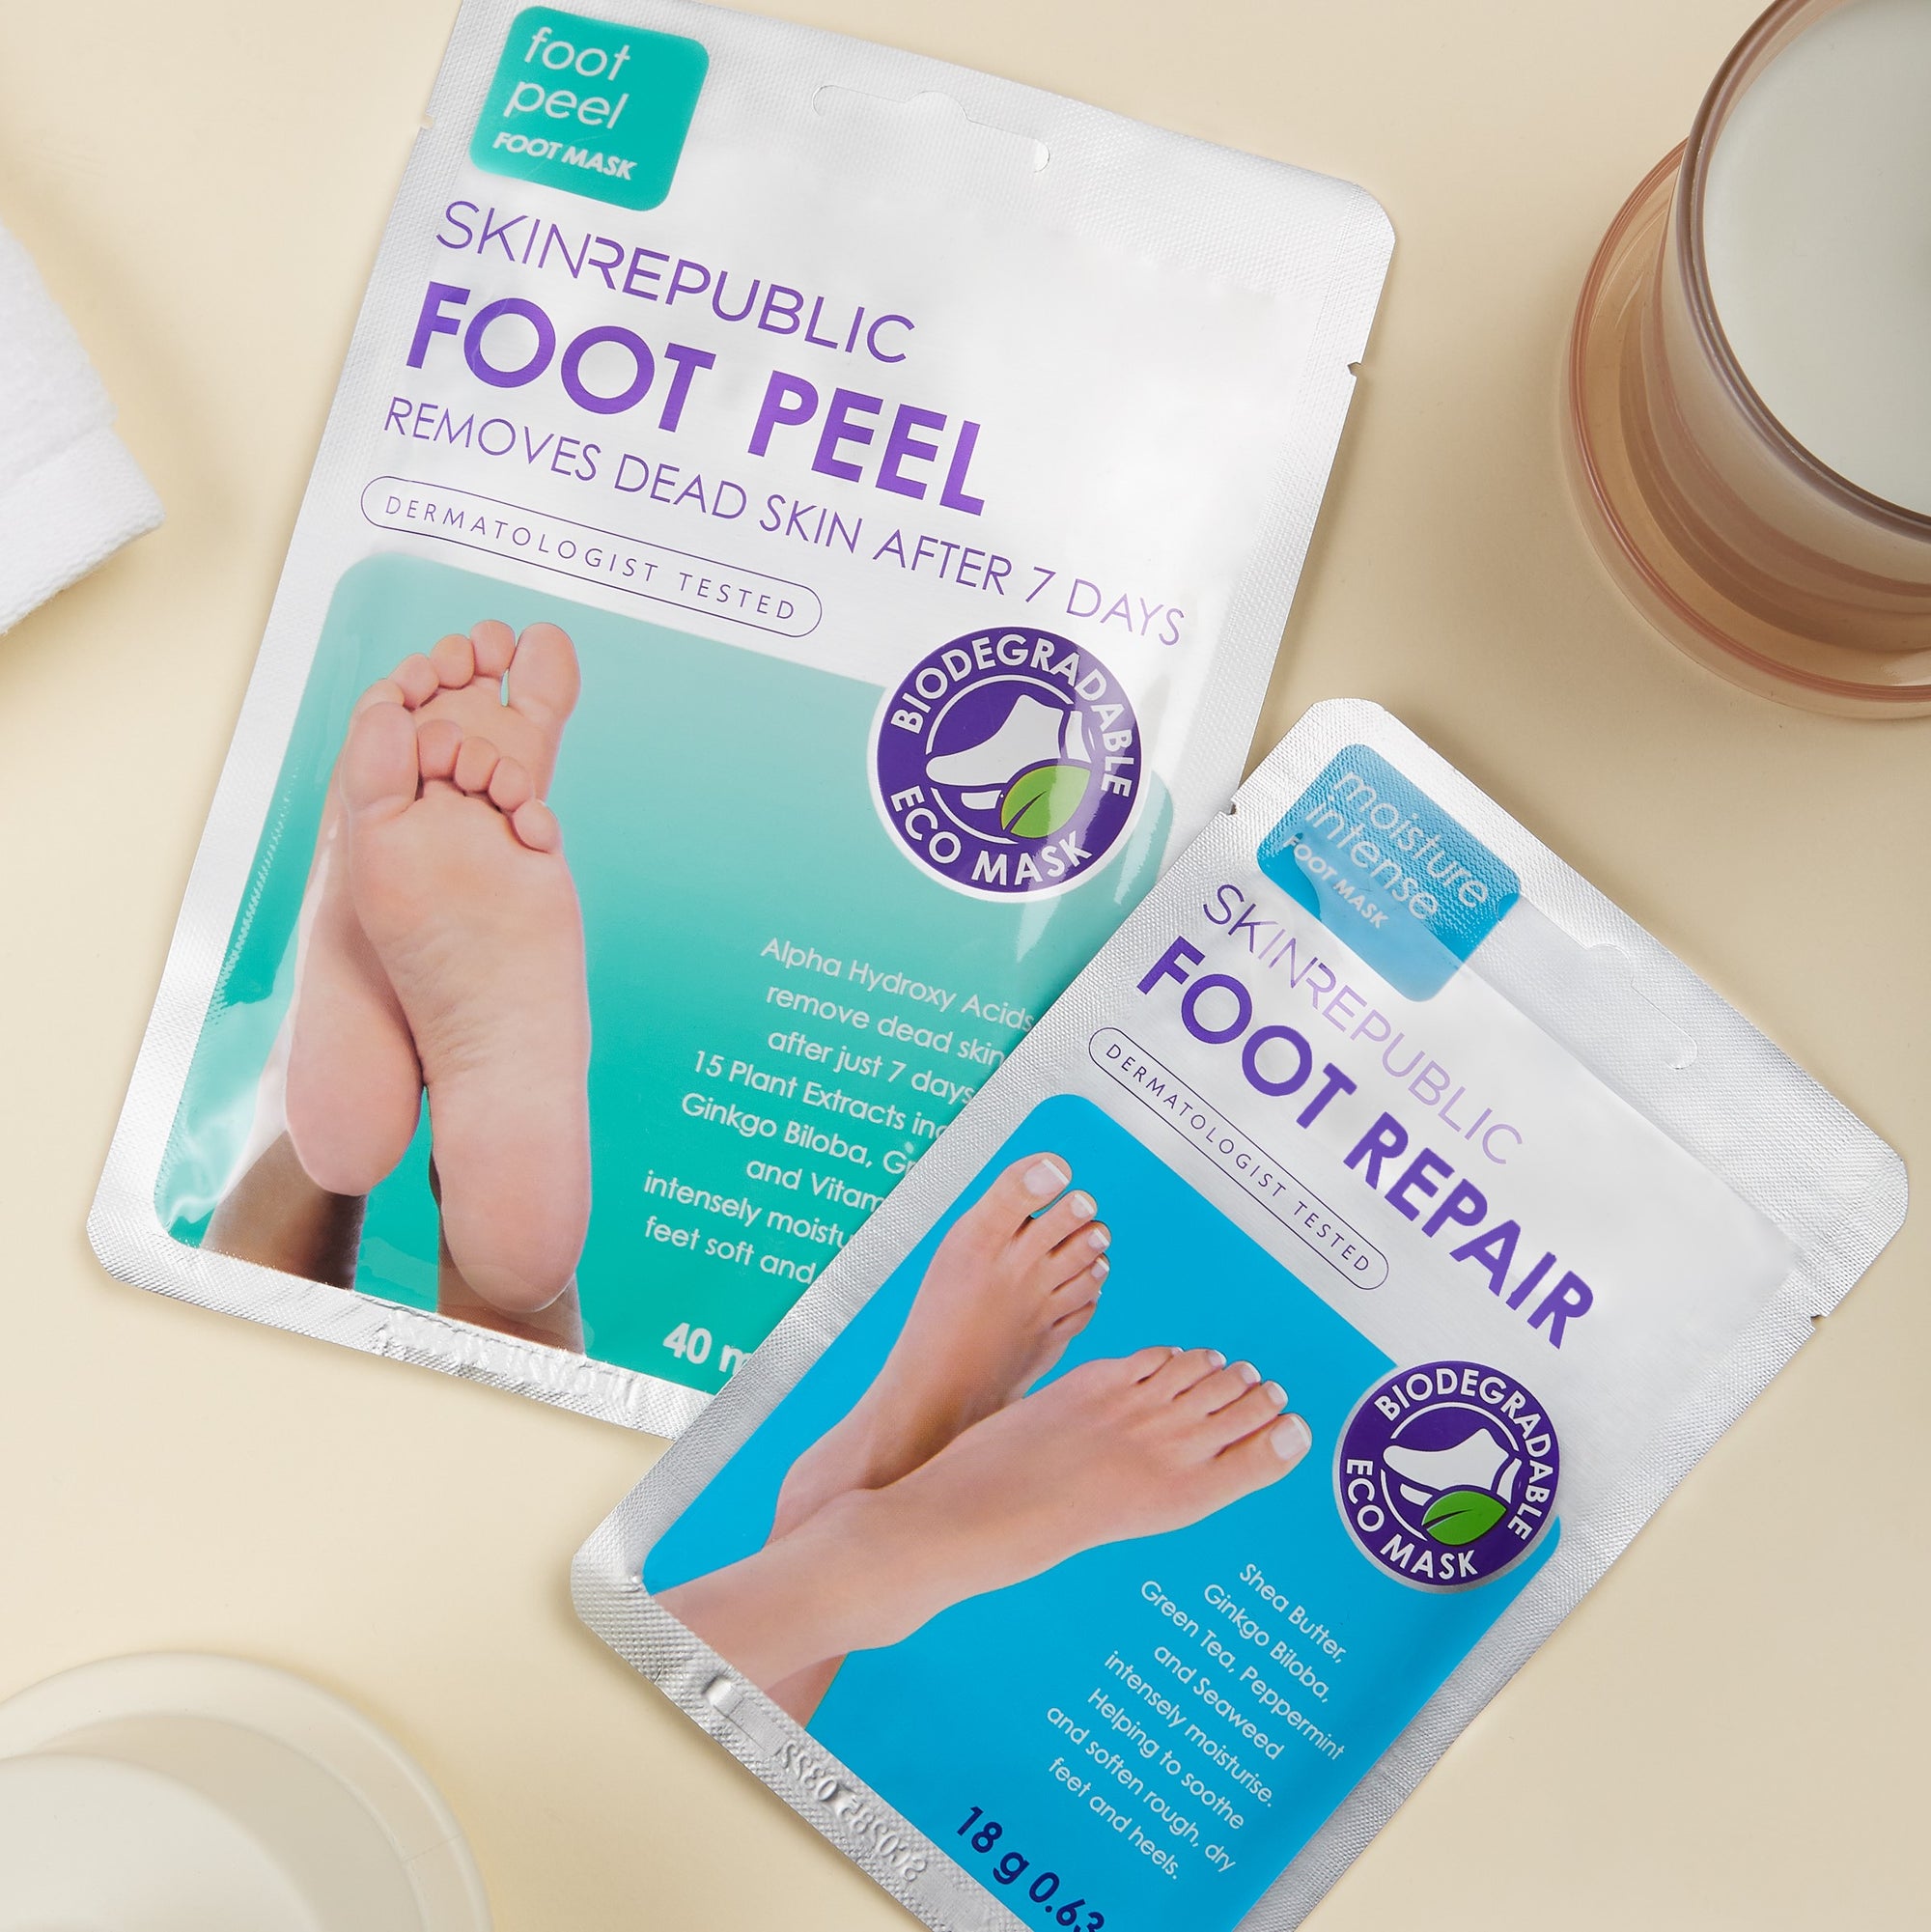 Foot Care Is The New Skin Care